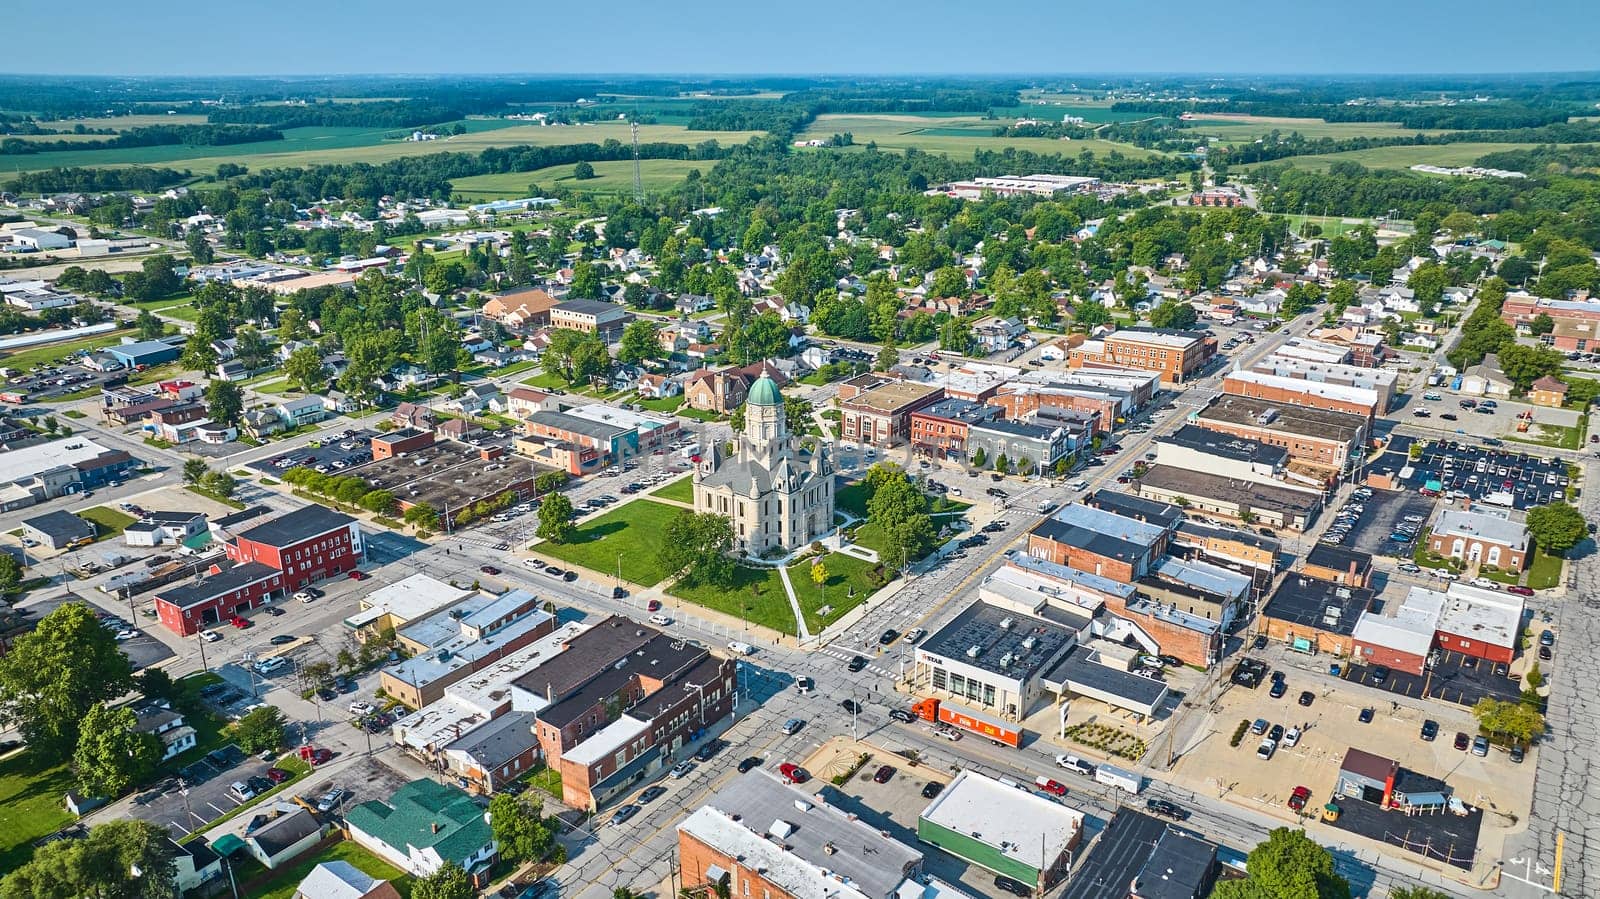 Image of Aerial view of Columbia City with Whitley County Courthouse in center of downtown